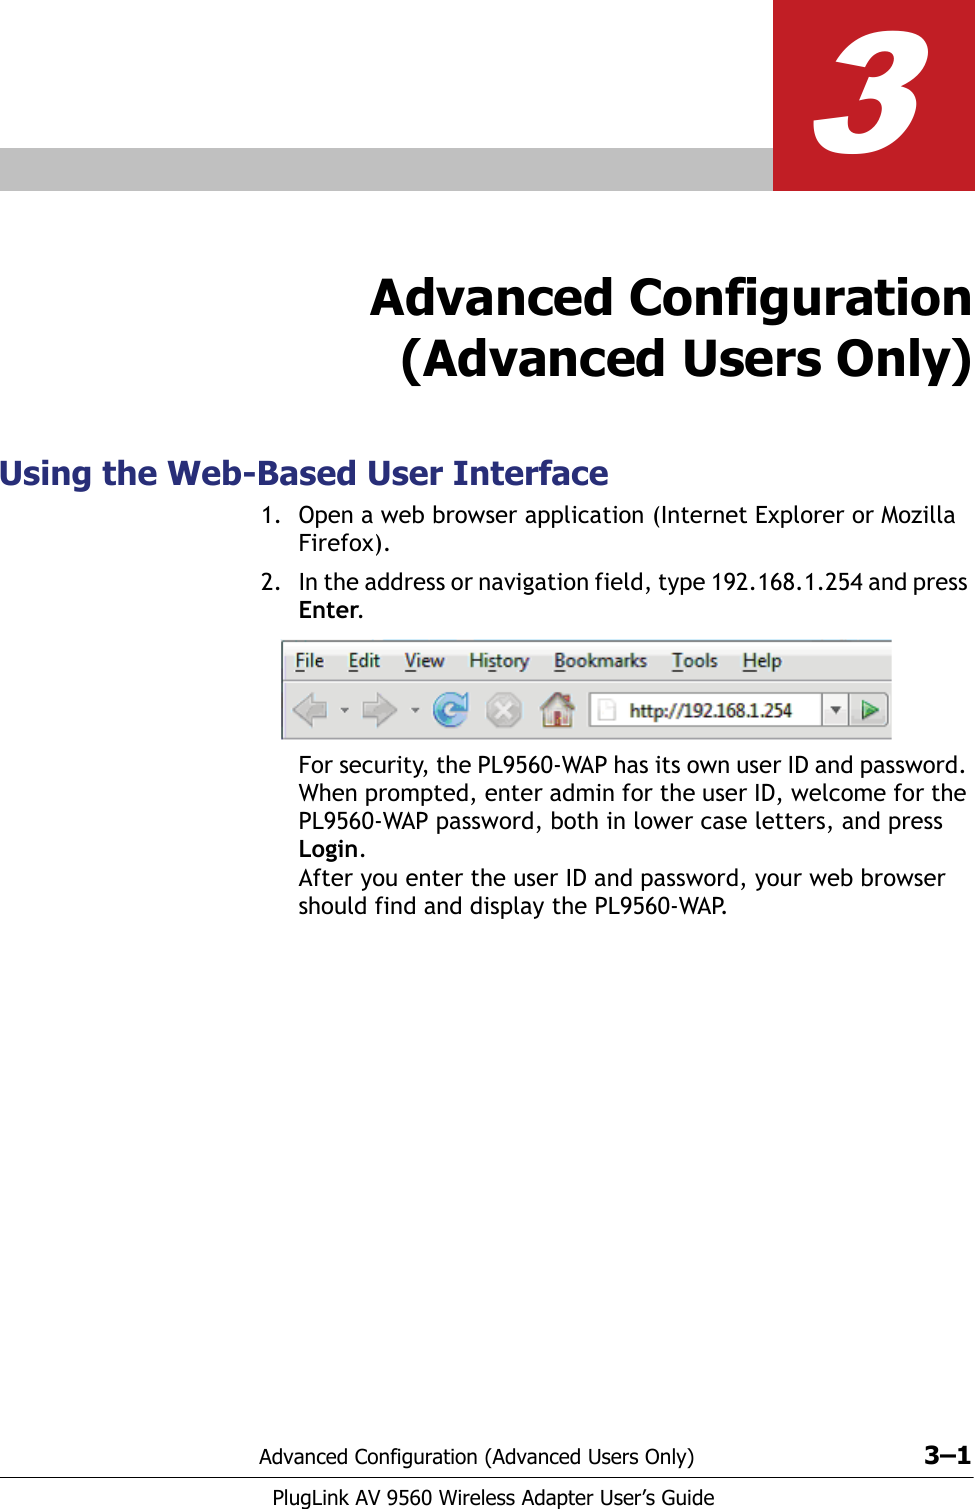 Advanced Configuration (Advanced Users Only) 3–1PlugLink AV 9560 Wireless Adapter User’s Guide3Advanced Configuration(Advanced Users Only)Using the Web-Based User Interface1. Open a web browser application (Internet Explorer or Mozilla Firefox).2. In the address or navigation field, type 192.168.1.254 and press Enter.For security, the PL9560-WAP has its own user ID and password. When prompted, enter admin for the user ID, welcome for the PL9560-WAP password, both in lower case letters, and press Login. After you enter the user ID and password, your web browser should find and display the PL9560-WAP.